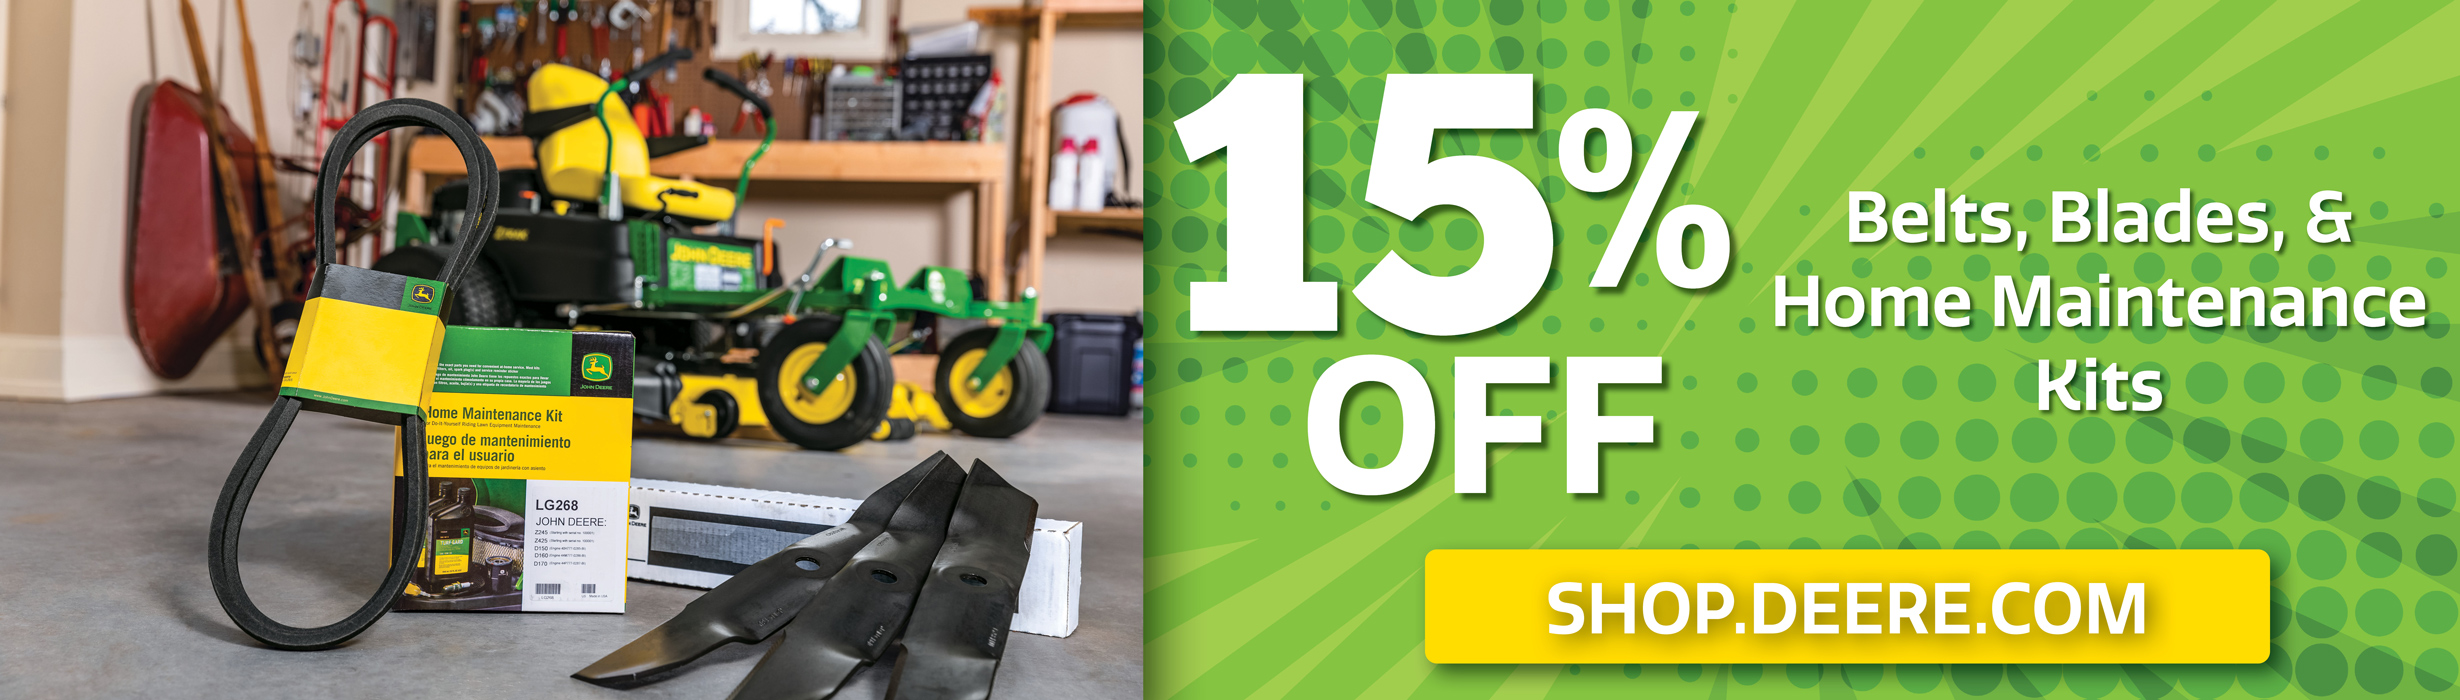 Save 15% on Belts, blades and more!